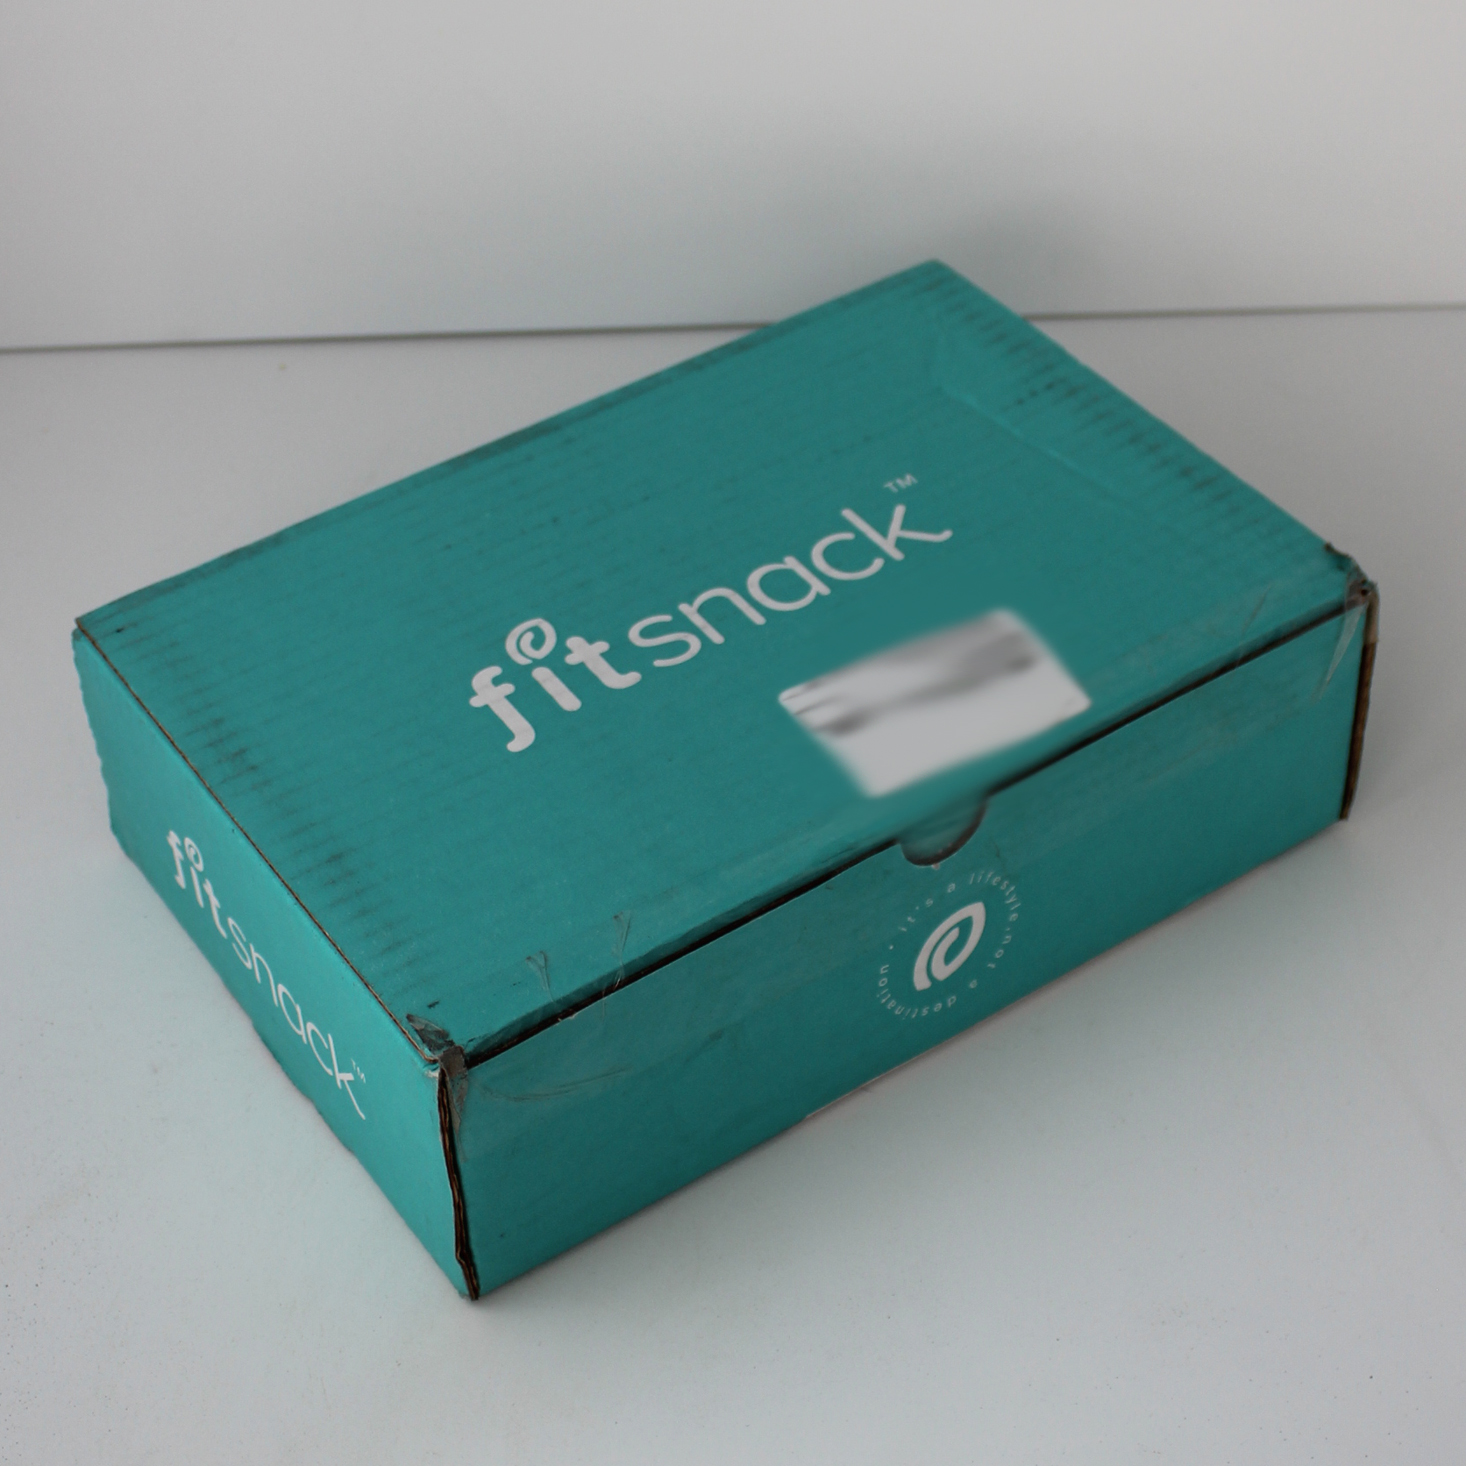 Fit Snack Subscription Box Review – March 2021